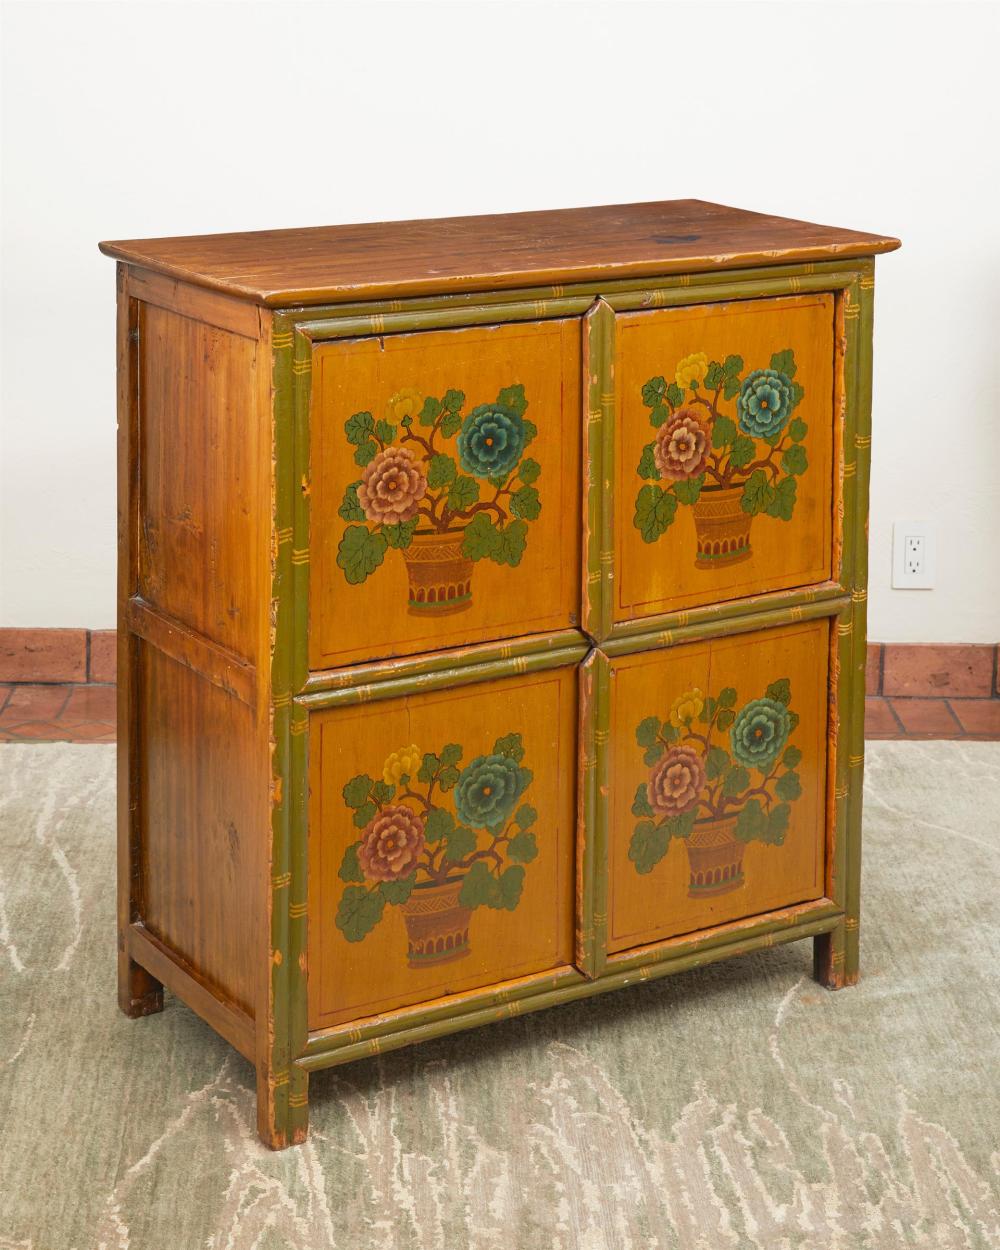 A CHINESE-STYLE PAINTED WOOD CABINETA